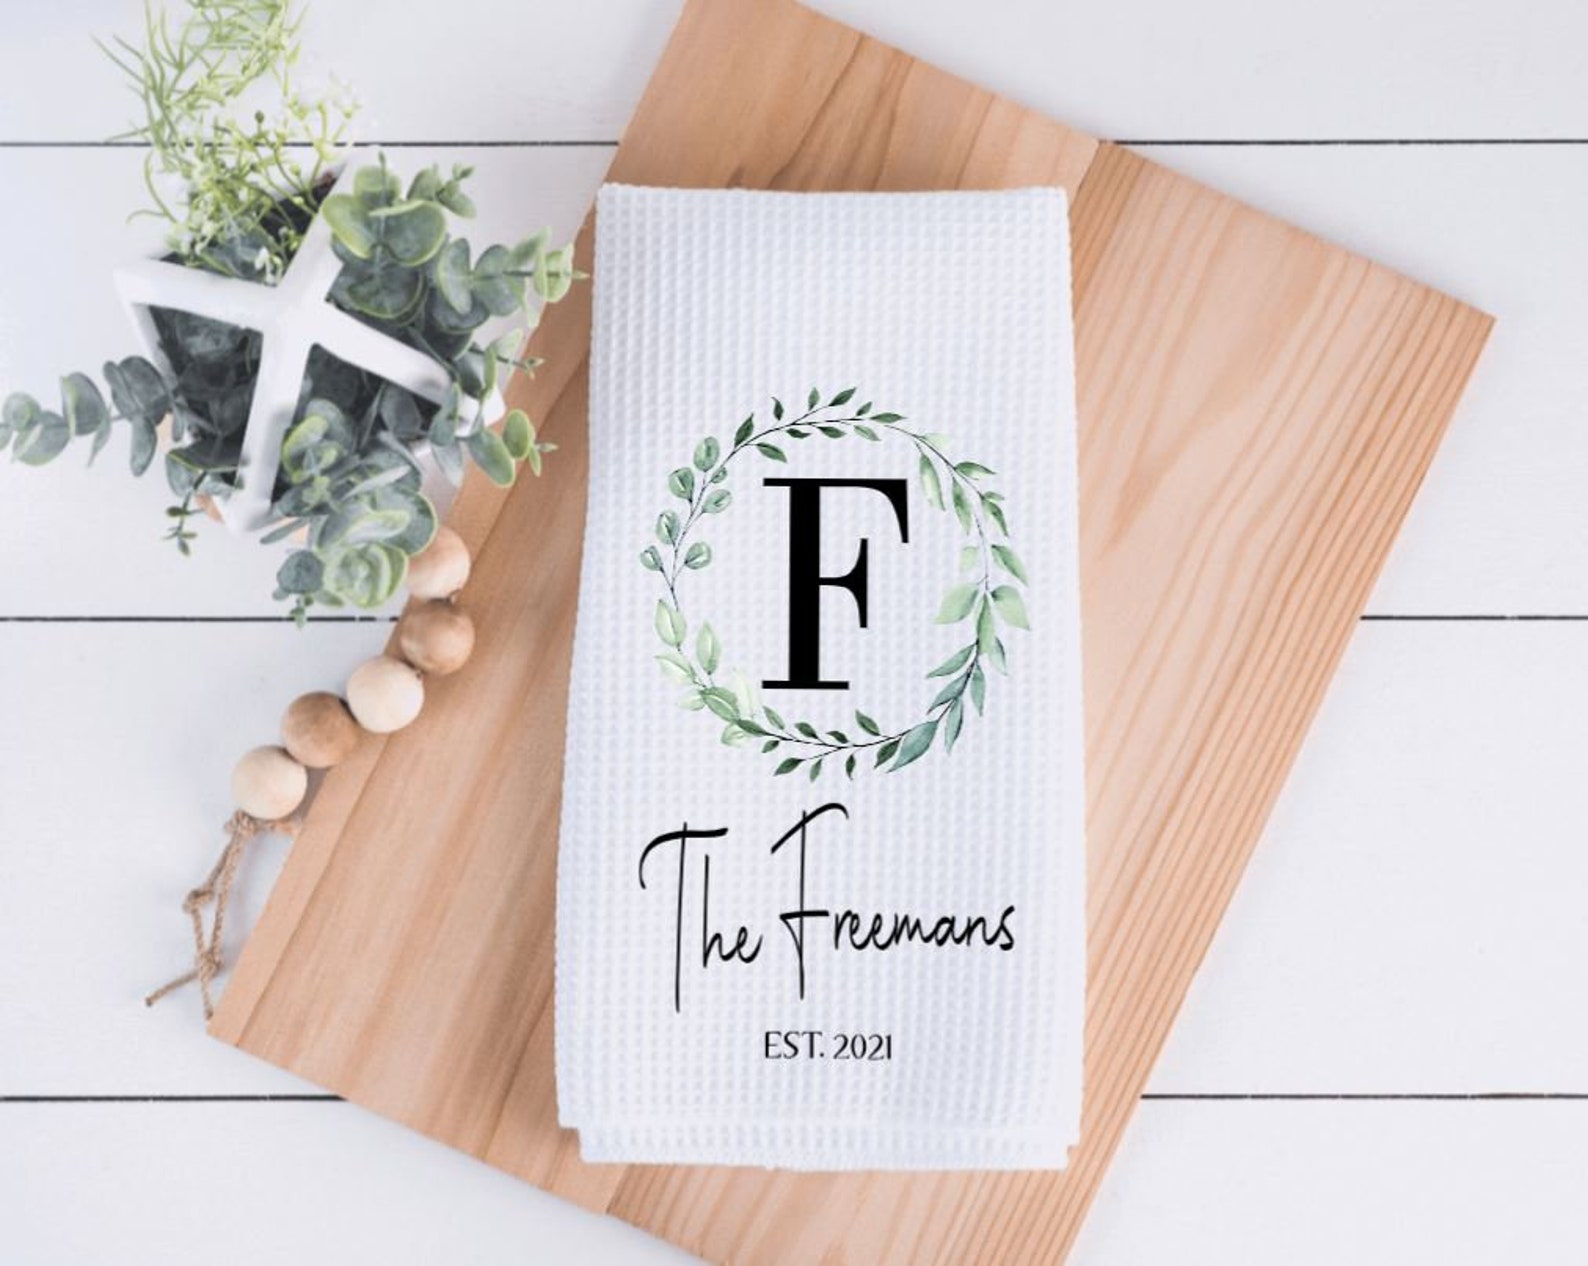 Personalized tea-towel: Amazing gifts under $15